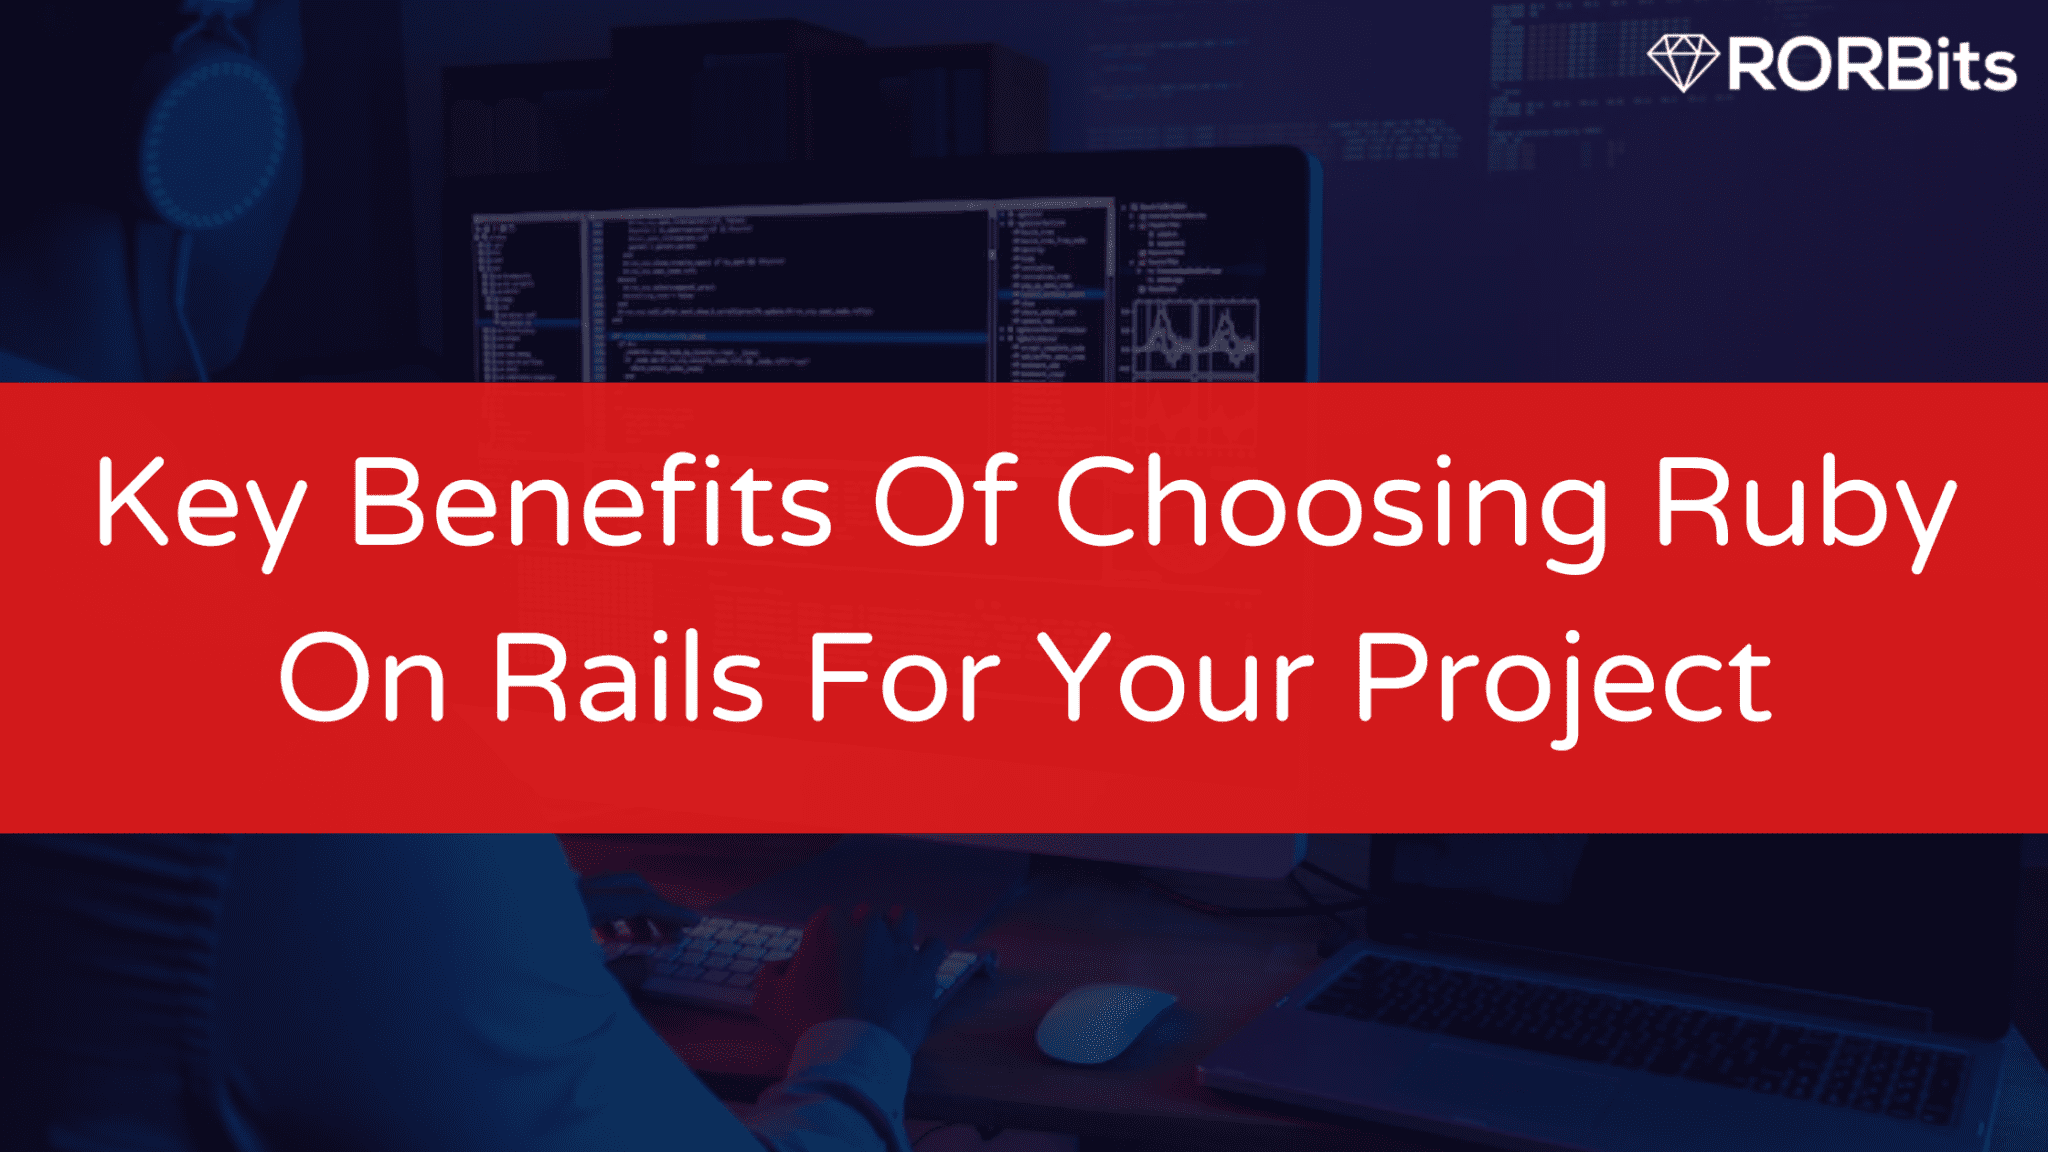 Key Benefits Of Choosing Ruby On Rails For Your Project